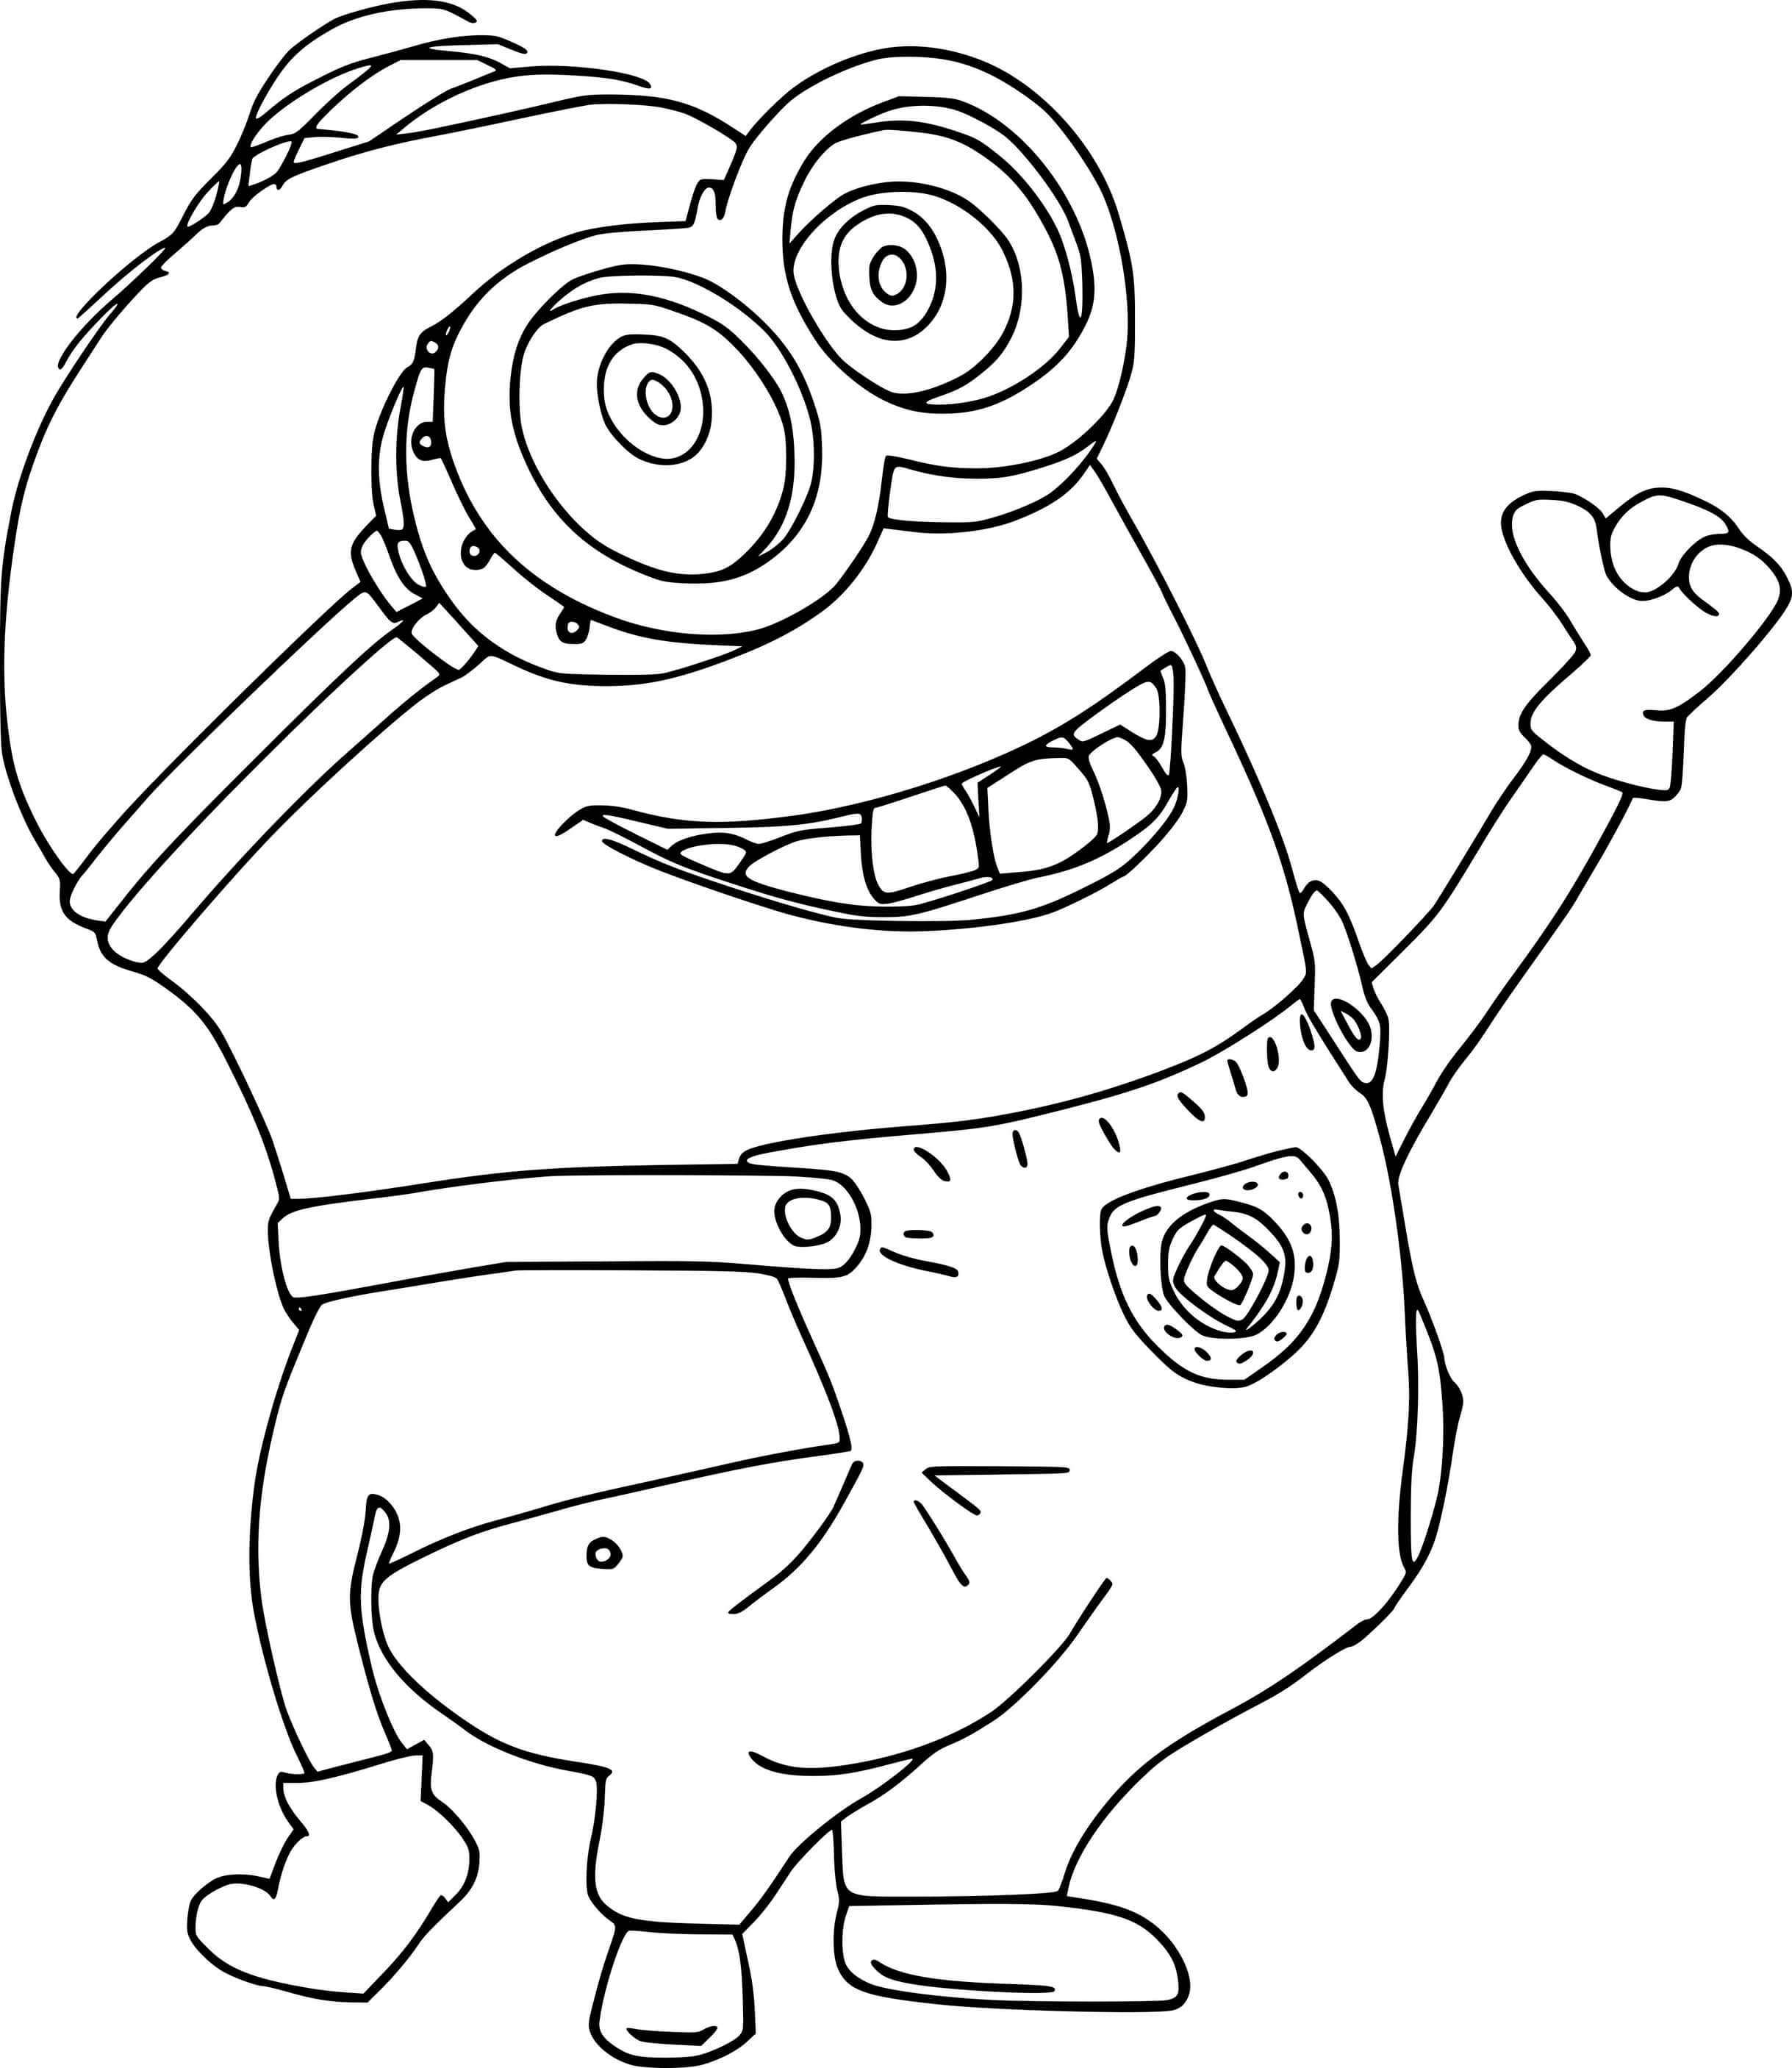 Minion Is Happy Coloring Page